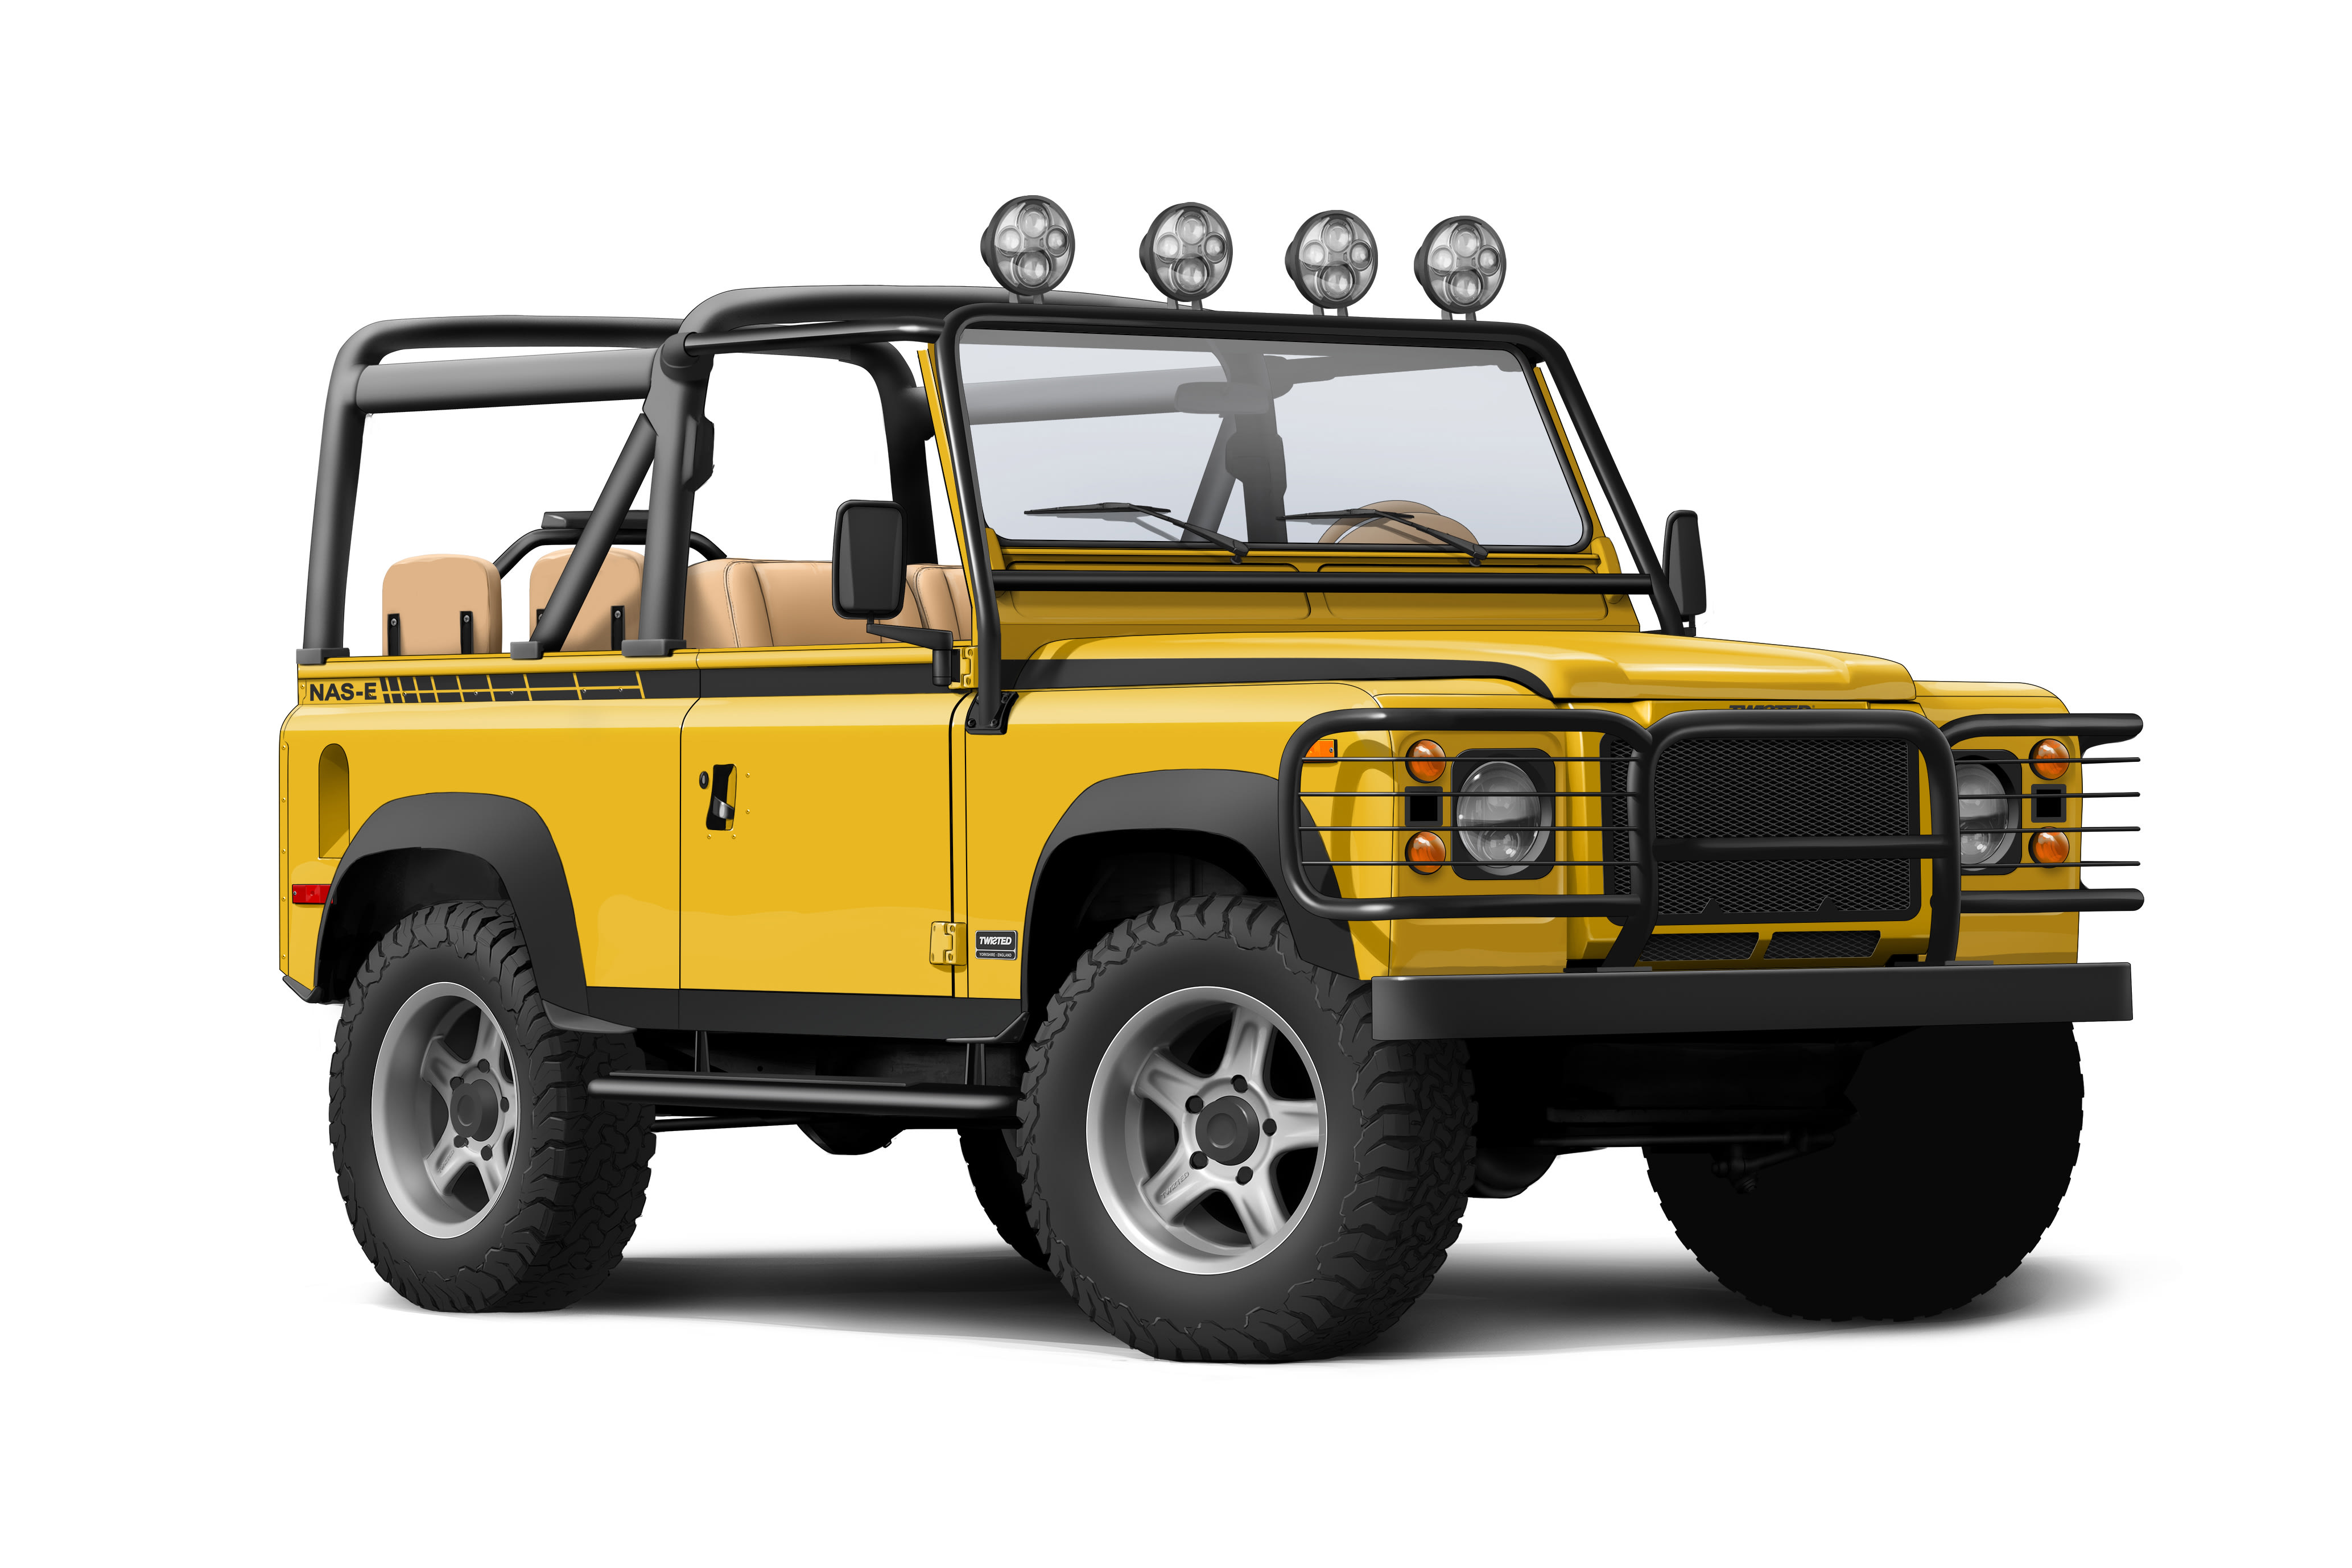 This electric Land Rover Defender costs a quarter of a million bucks